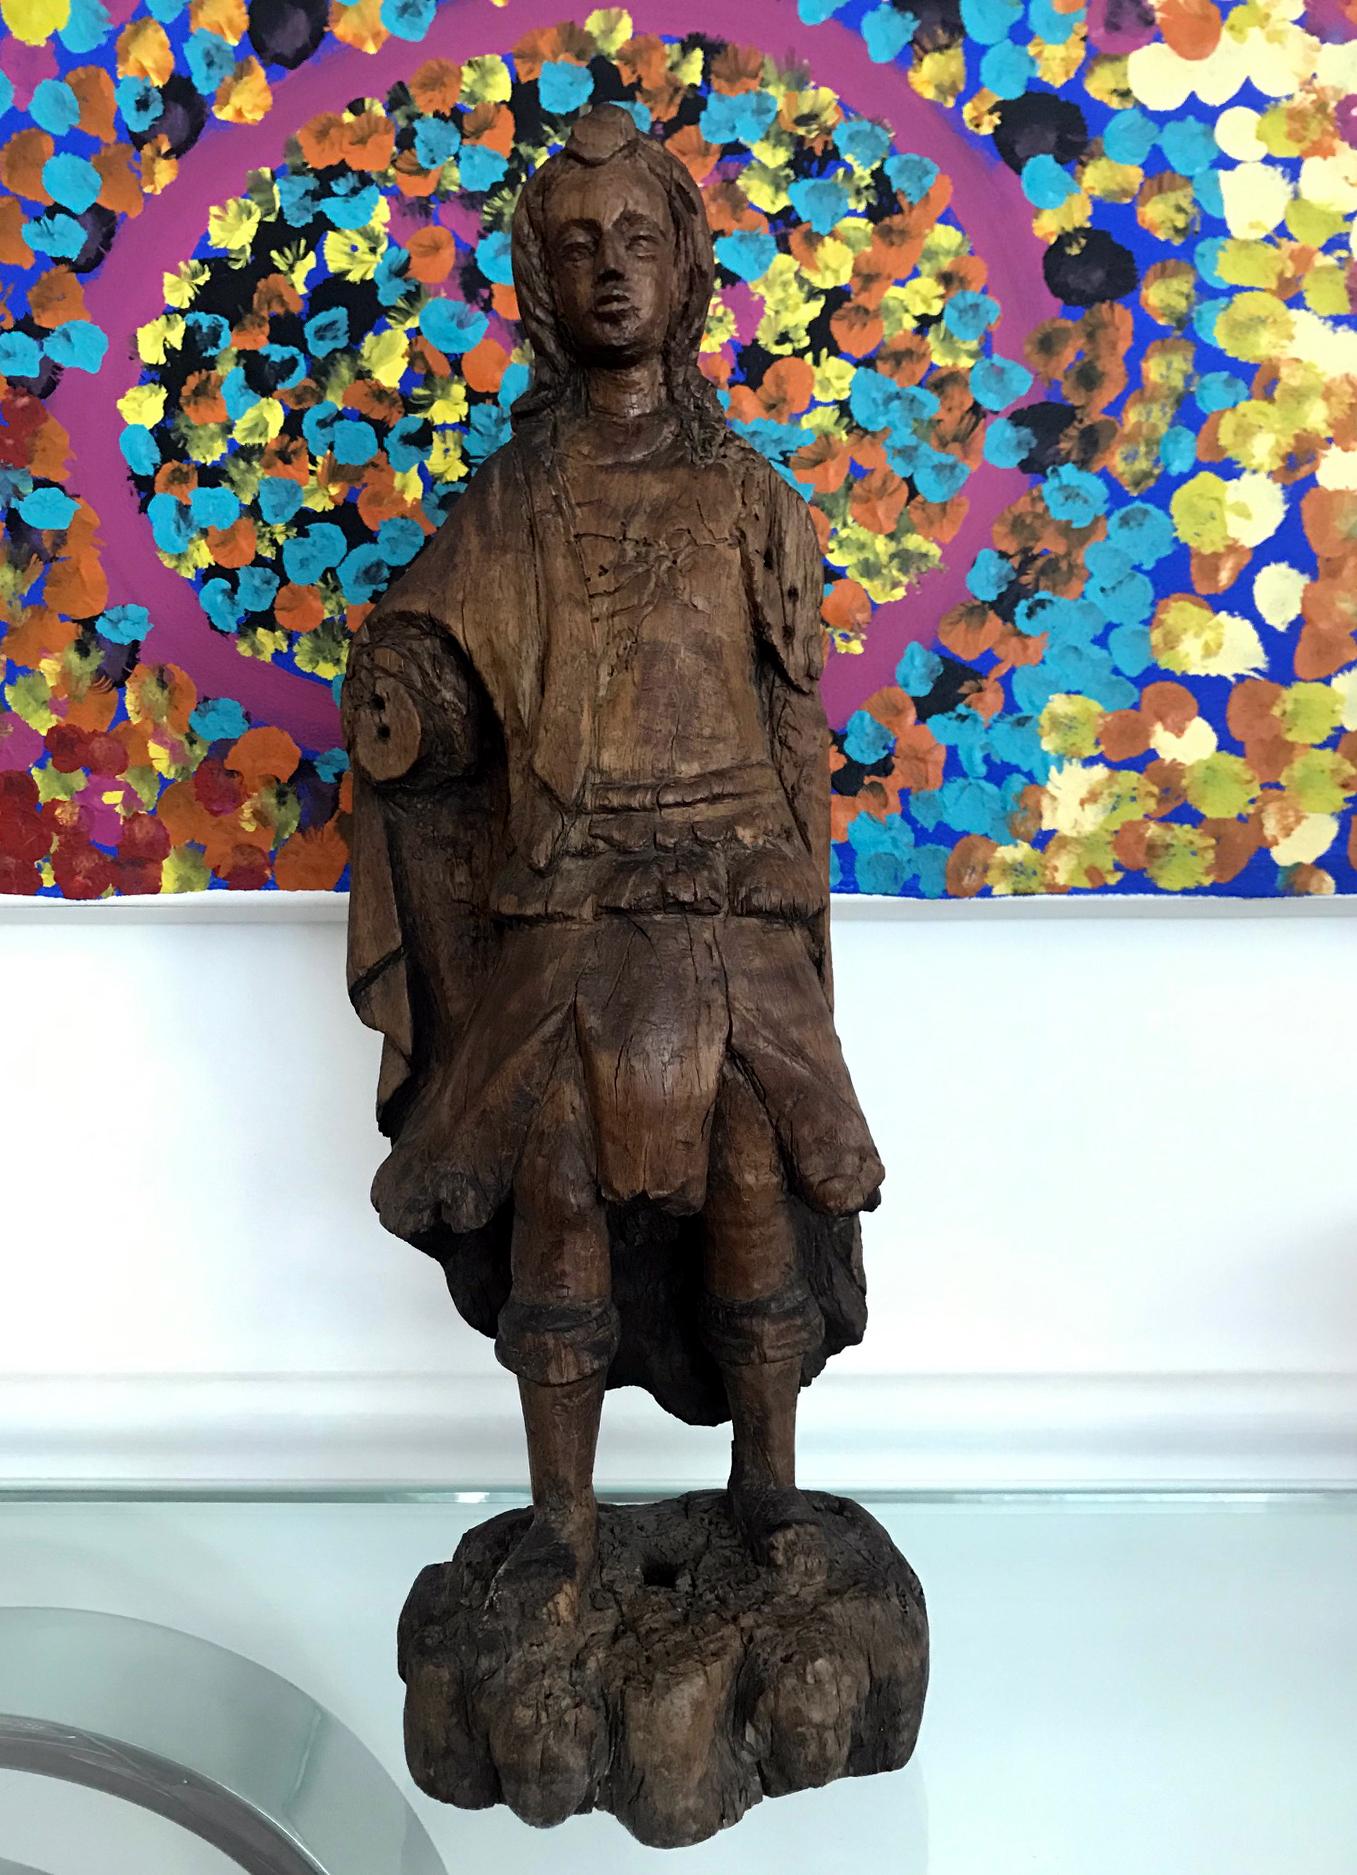 An very well weathered Spanish-colonial Santo, likely depicting St Michael or St Miguel. Carved from the wood, the statue displays historical loss on both limbs and also the wings on the back, as well as the base, but also tremendous patina and